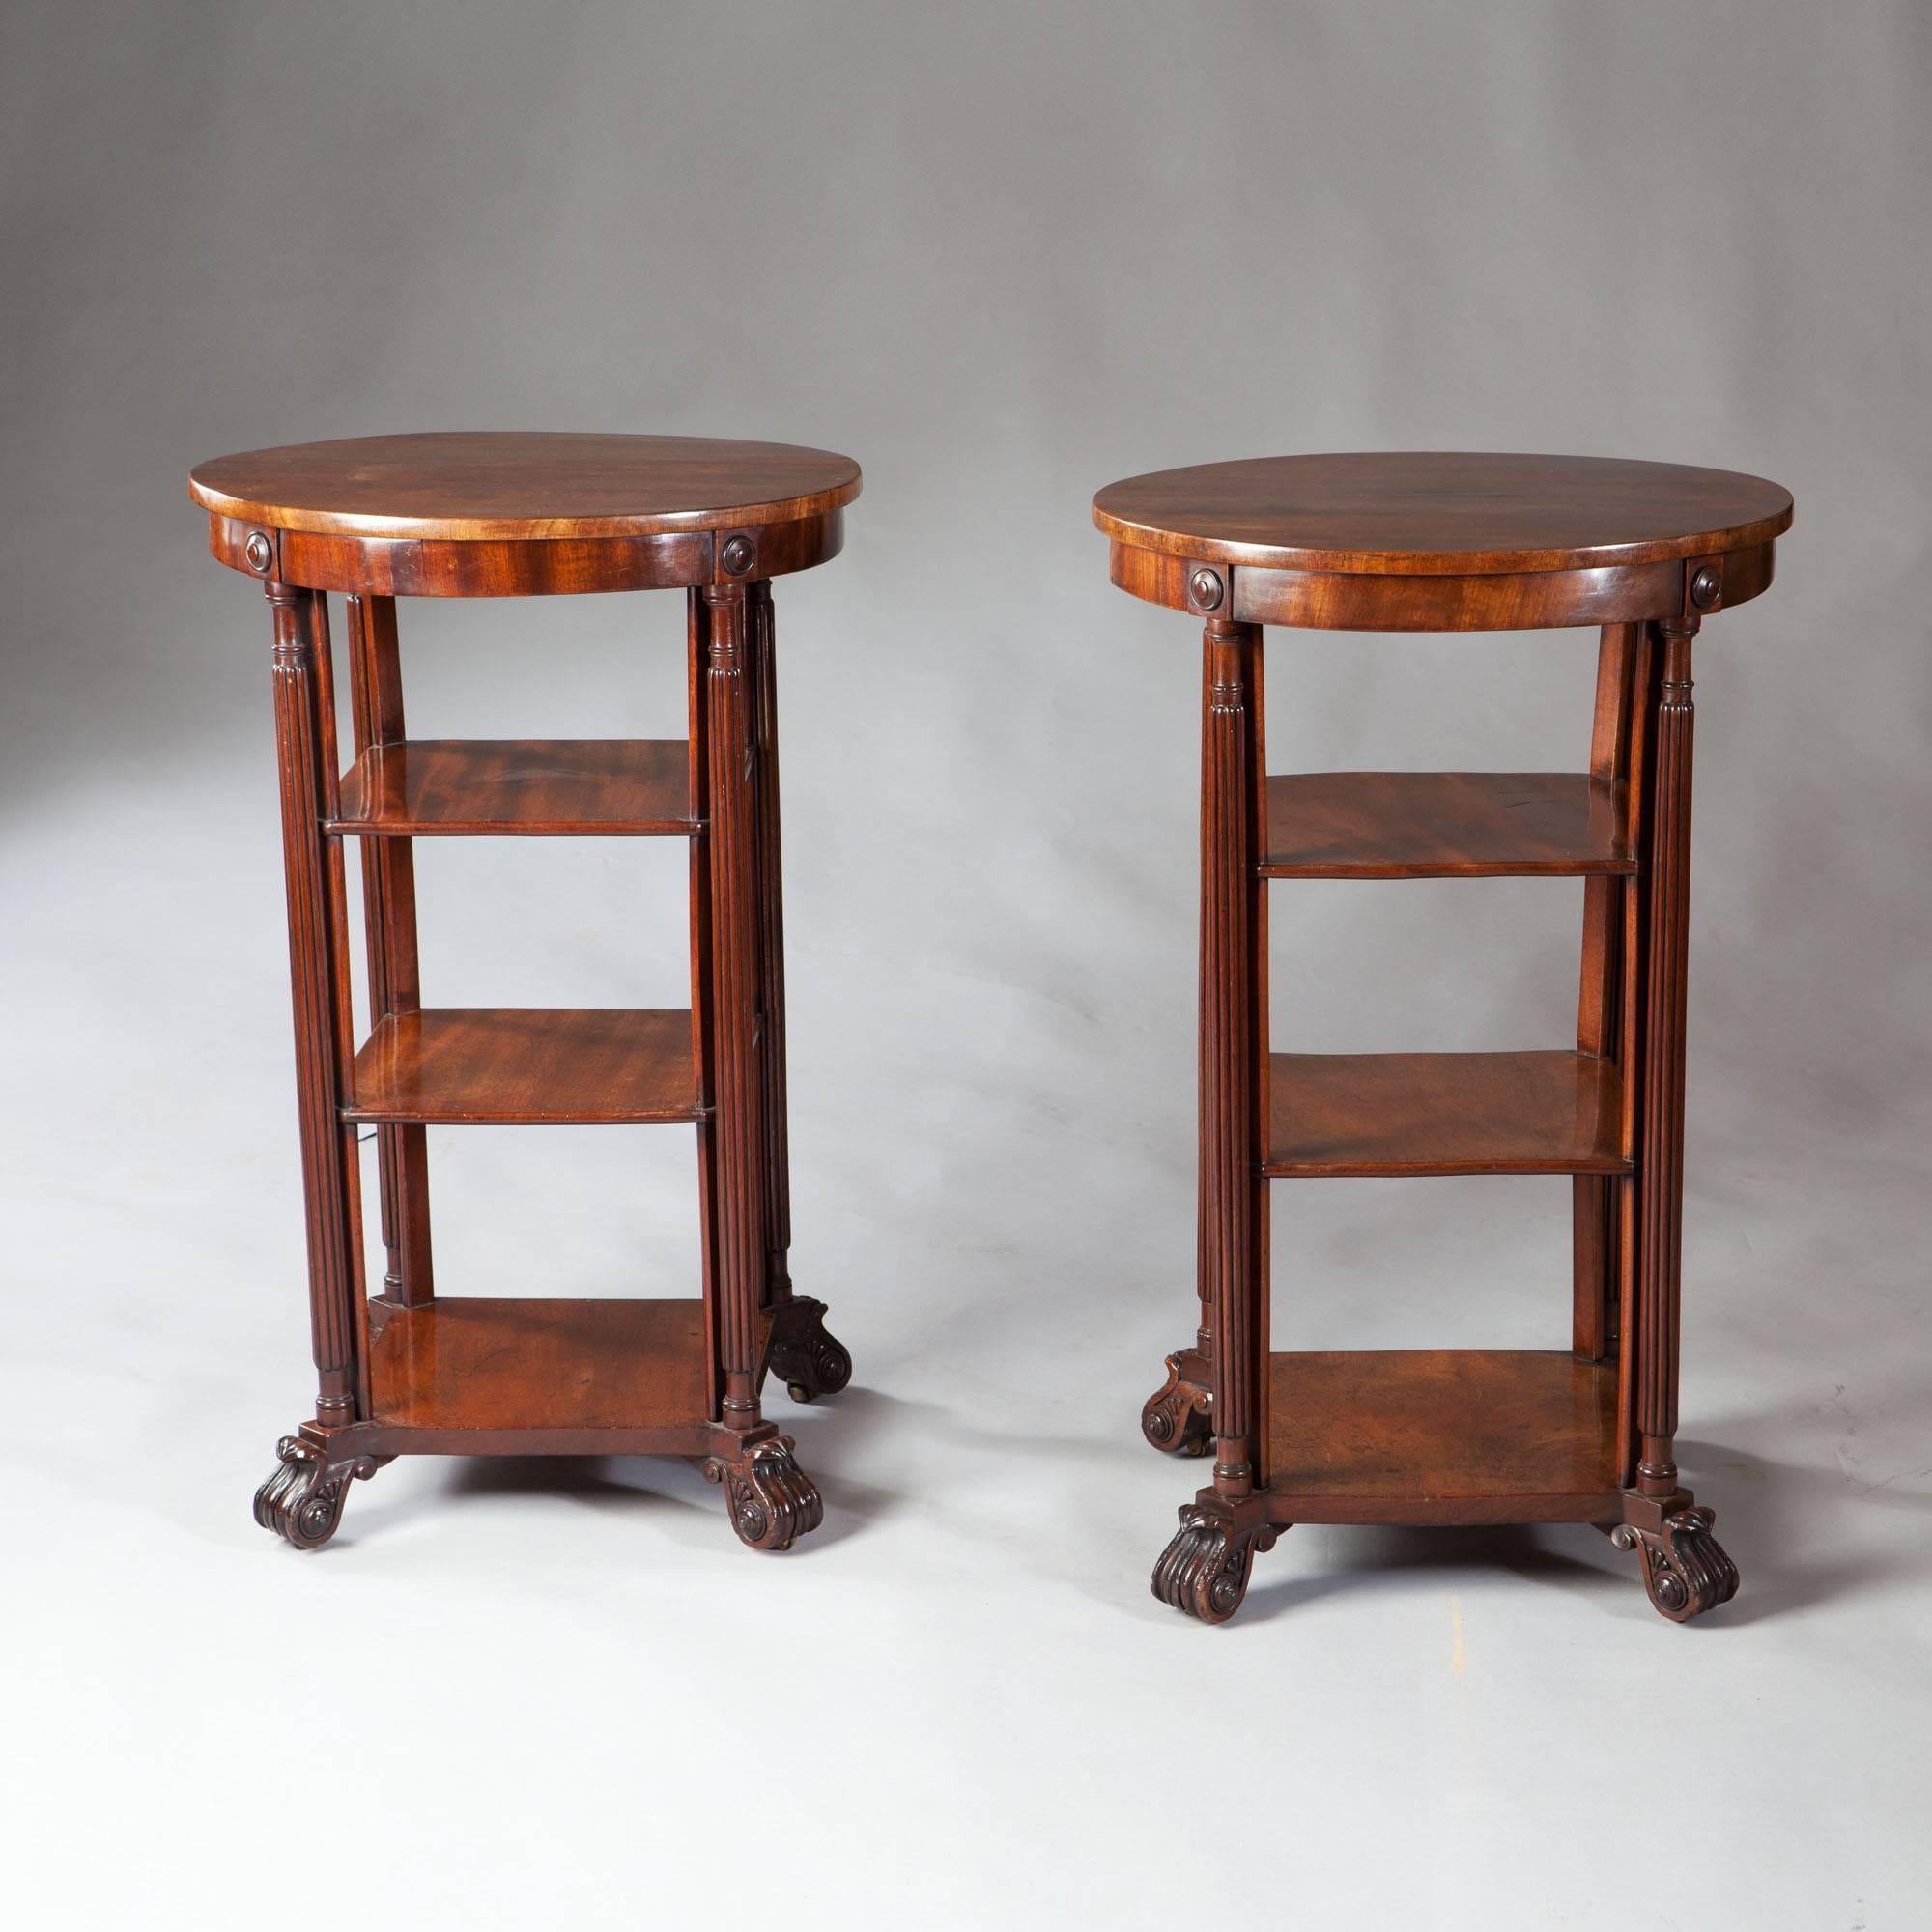 A pair of William IV mahogany three-tier end tables, the circular tops raised on fluted legs supporting two shelves and raised on bracket feet with carved foliate detail.

Attributed to Gillows.
Measures:
Height 30 1/4in.
Diameter of top 19